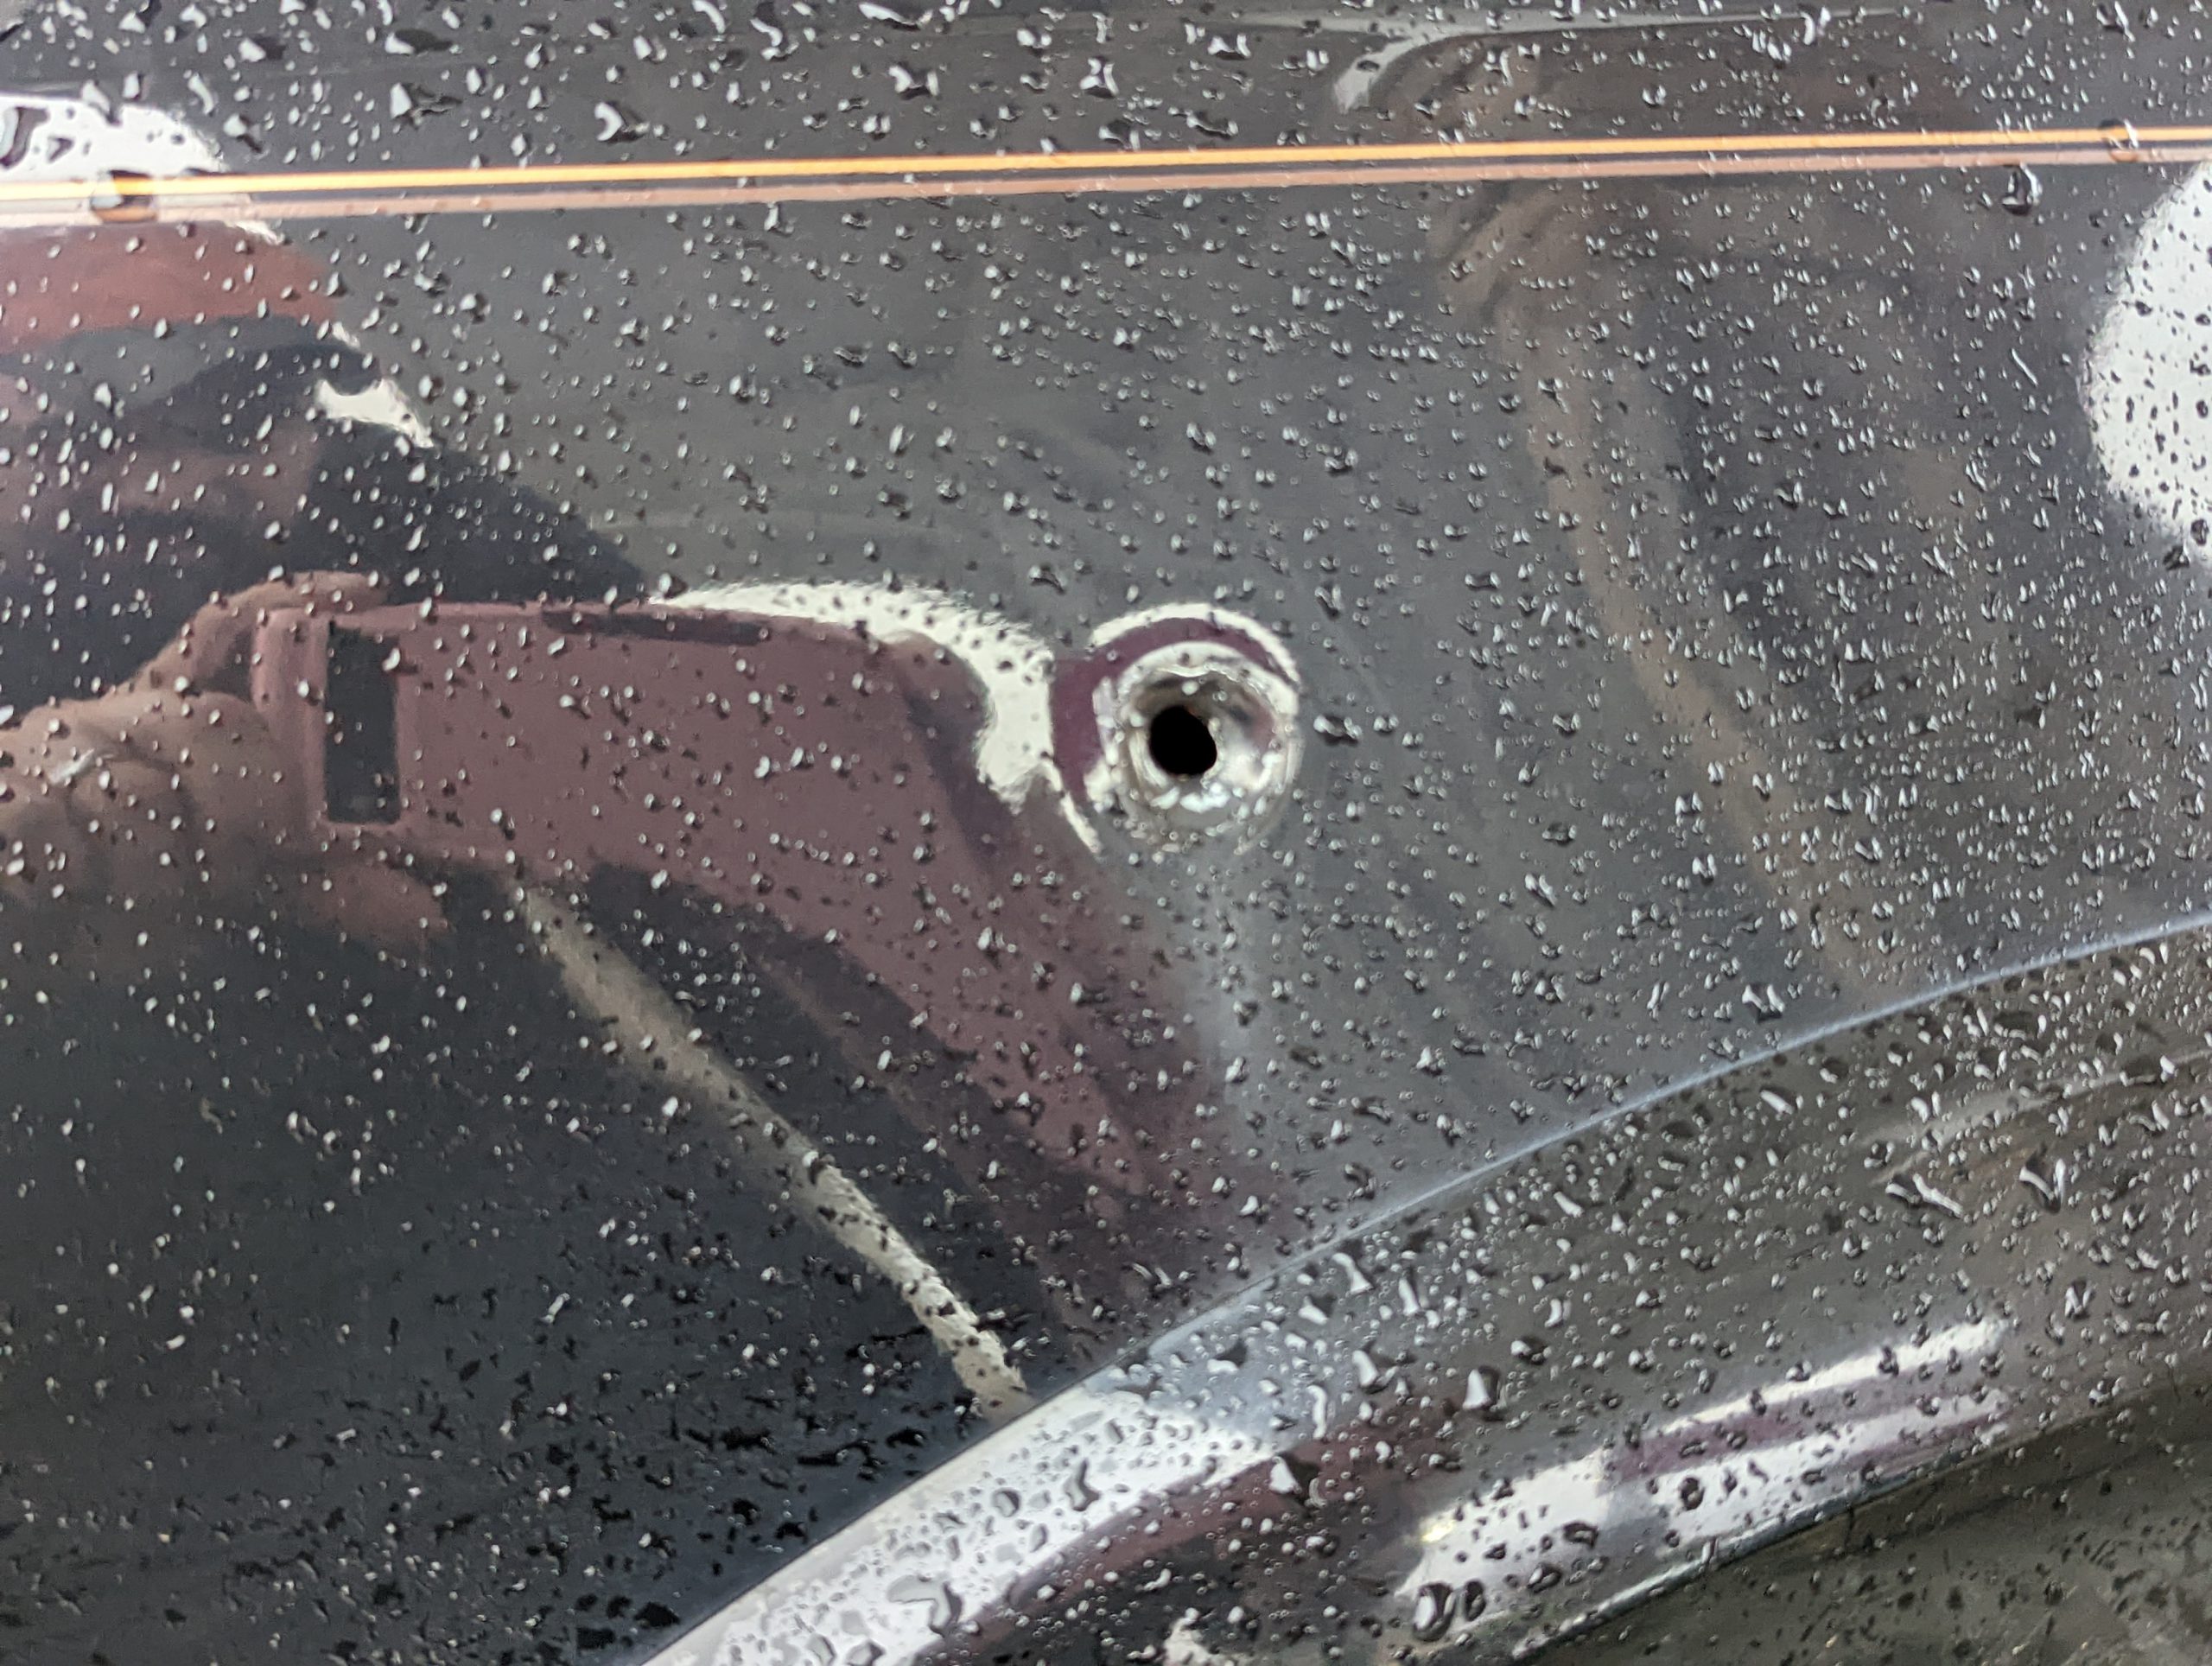 Closeup of a bullet hole in a fender.